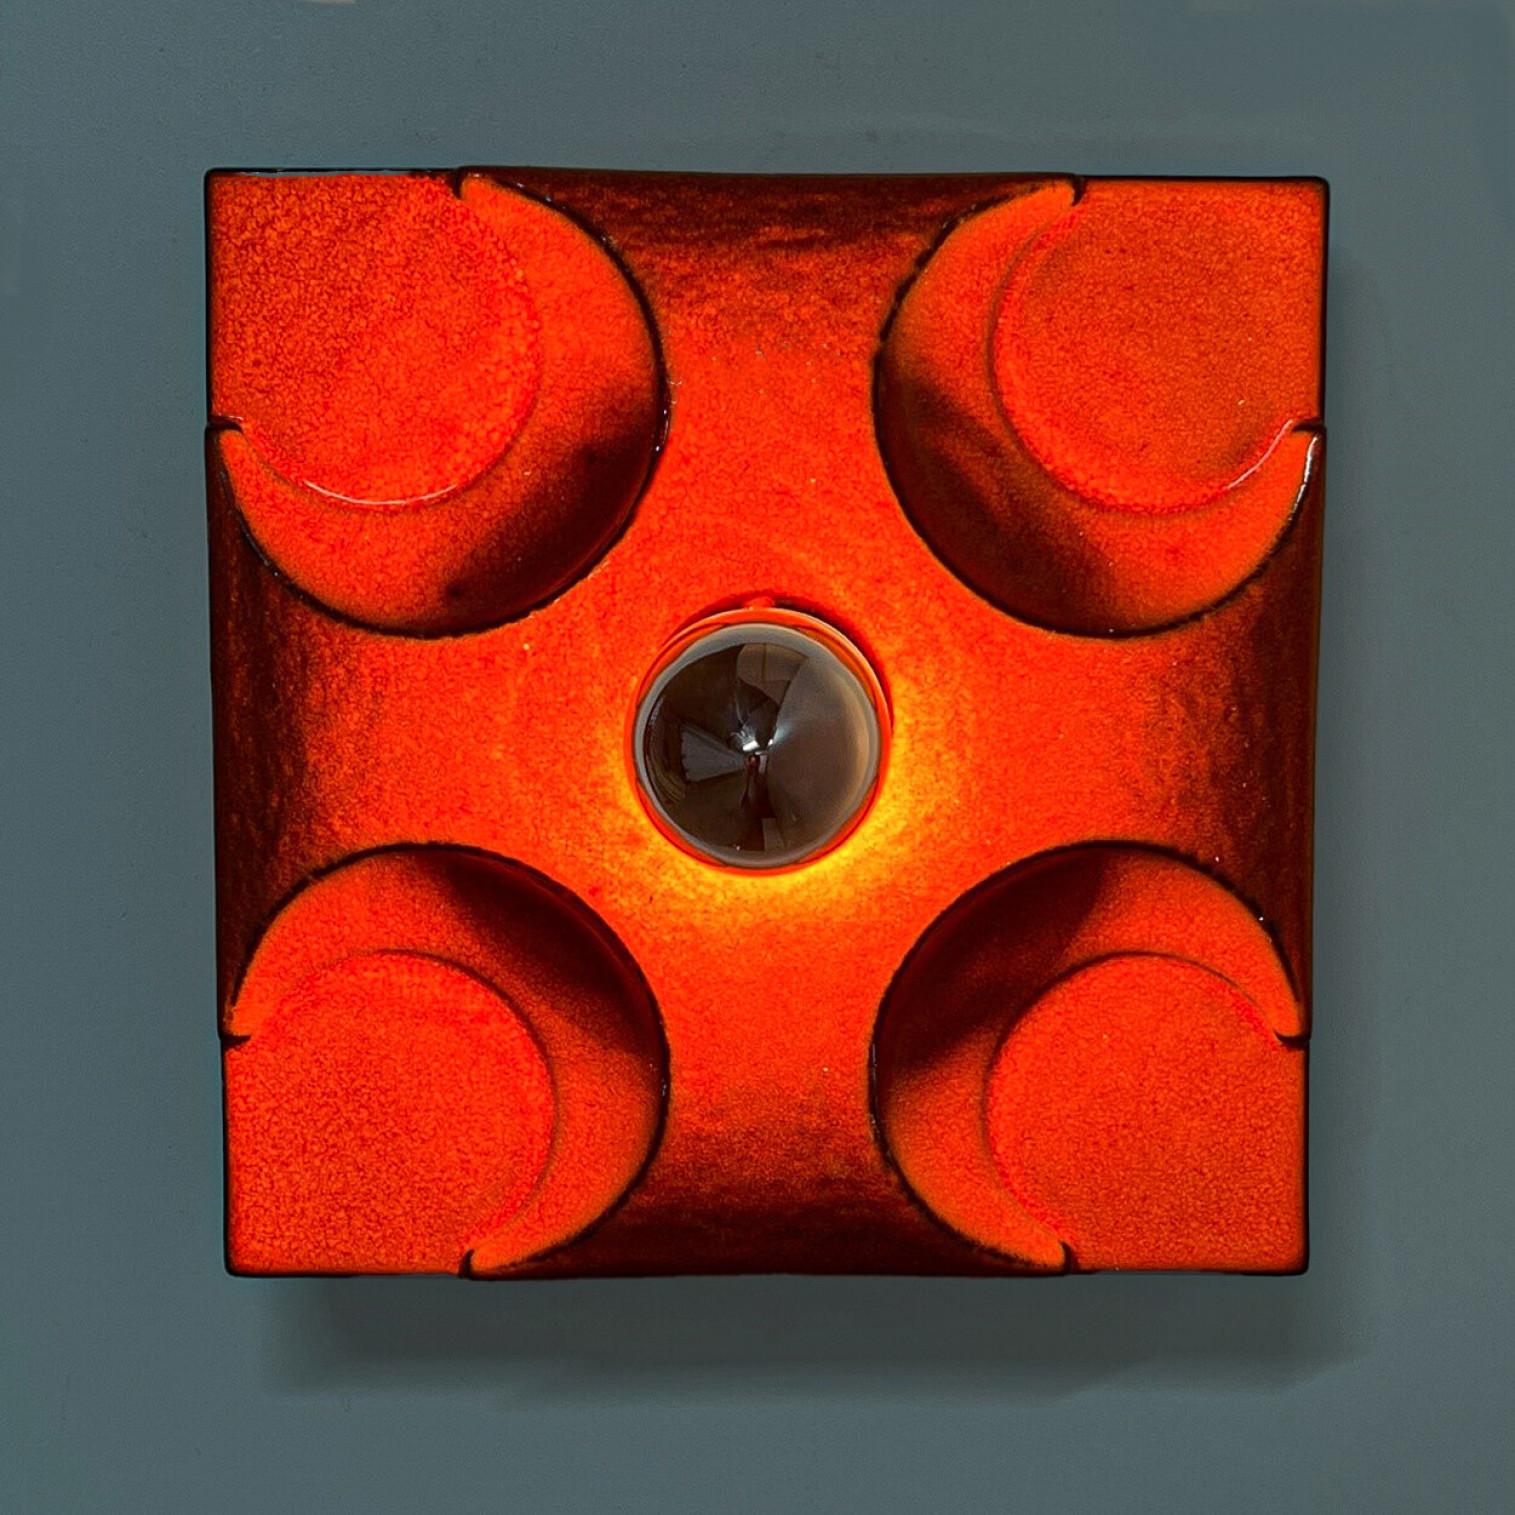 Pair of Orange Square Ceramic Wall Lights, Germany, 1970 For Sale 1